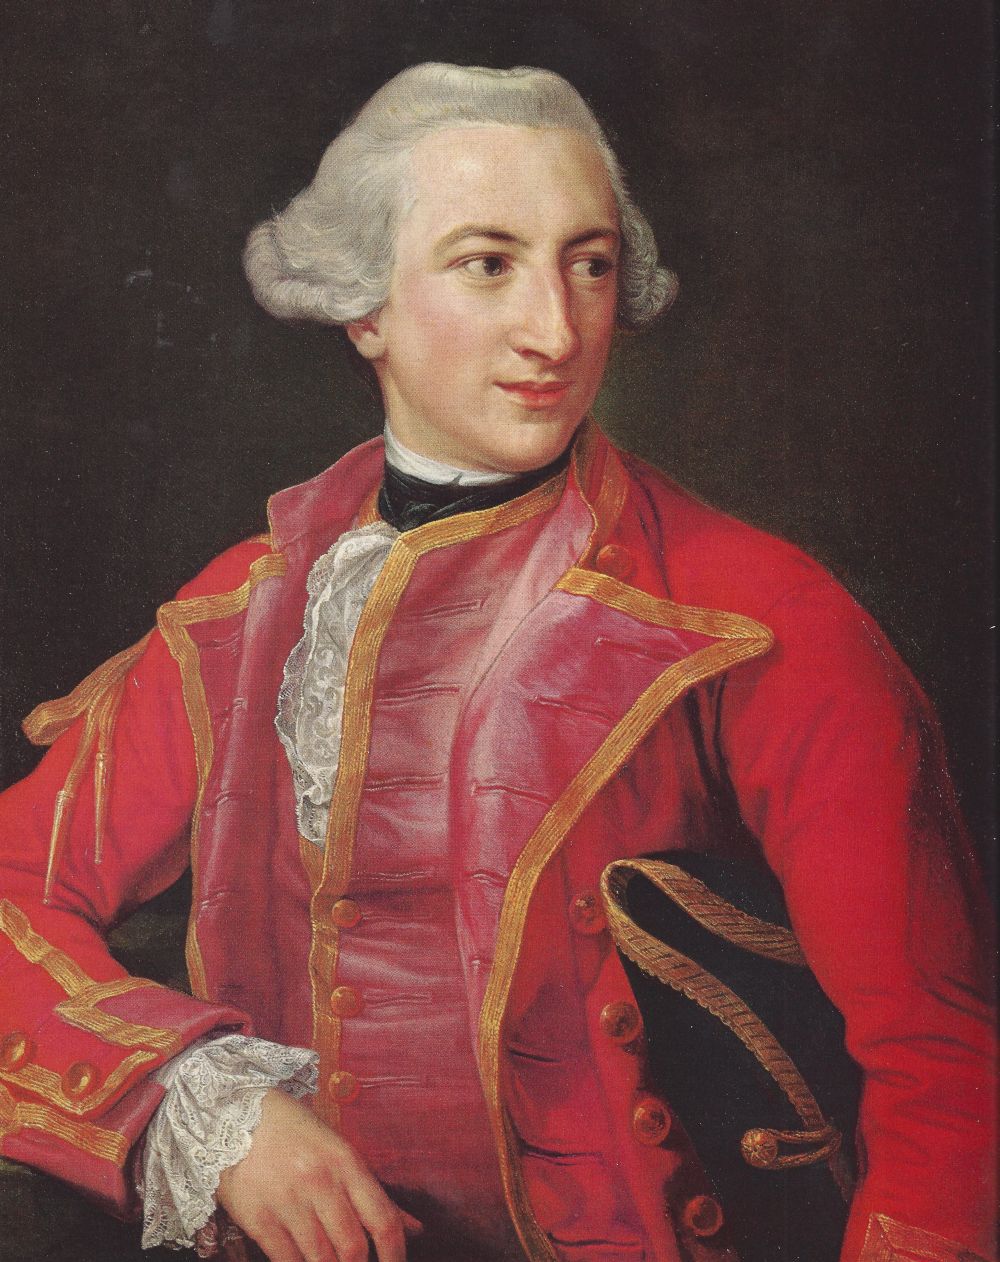 Hugh Percy, joined the British Army as a teenager and rose to the rank of Lieutenant General by the time he joined the forces occupying Boston in 1775. 